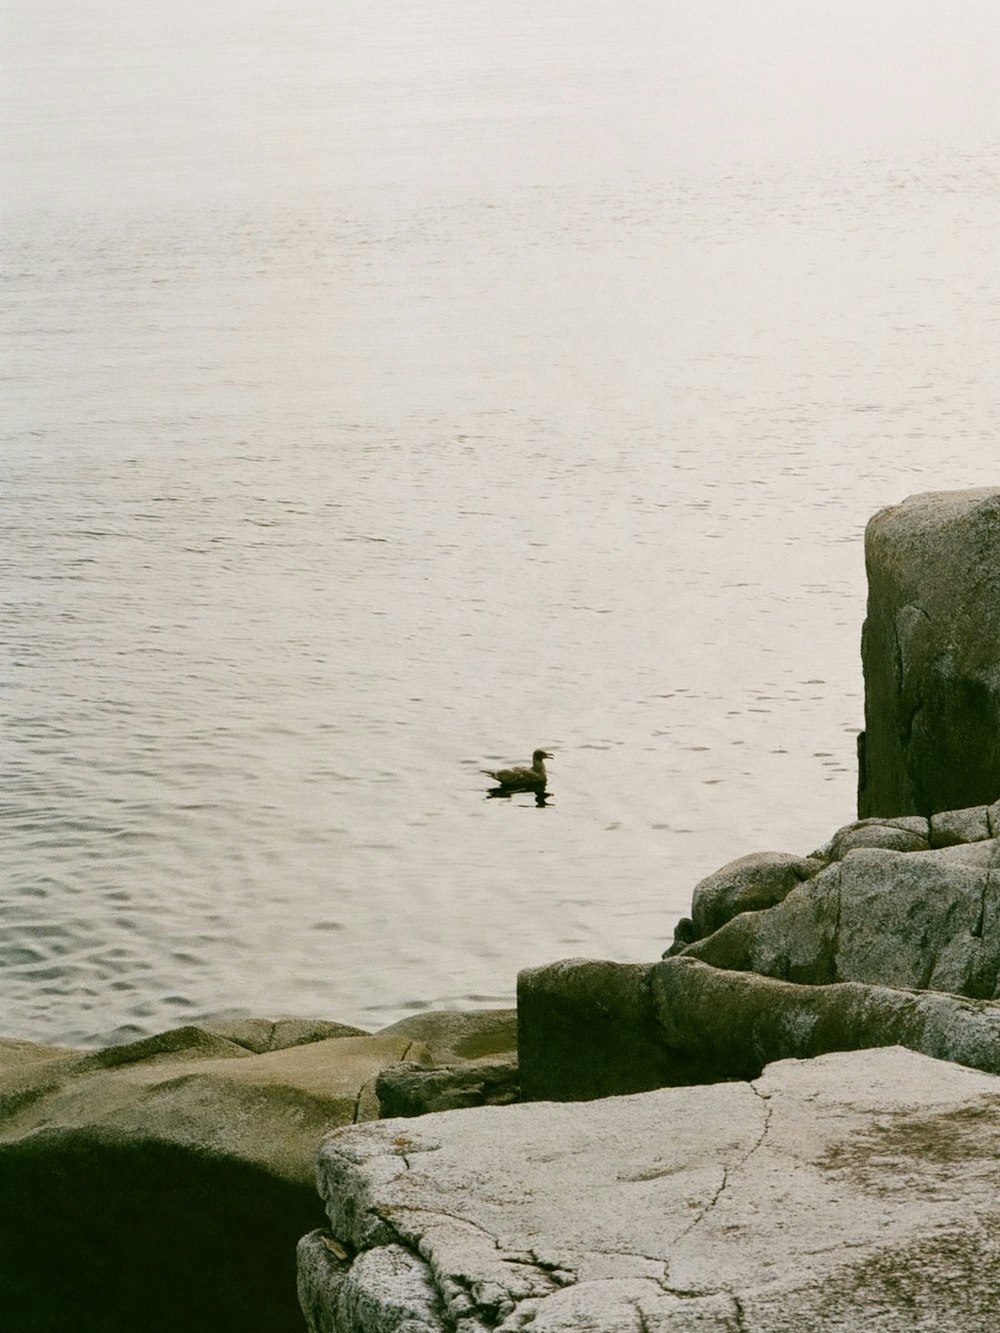 a duck swimming in the water near some rocks